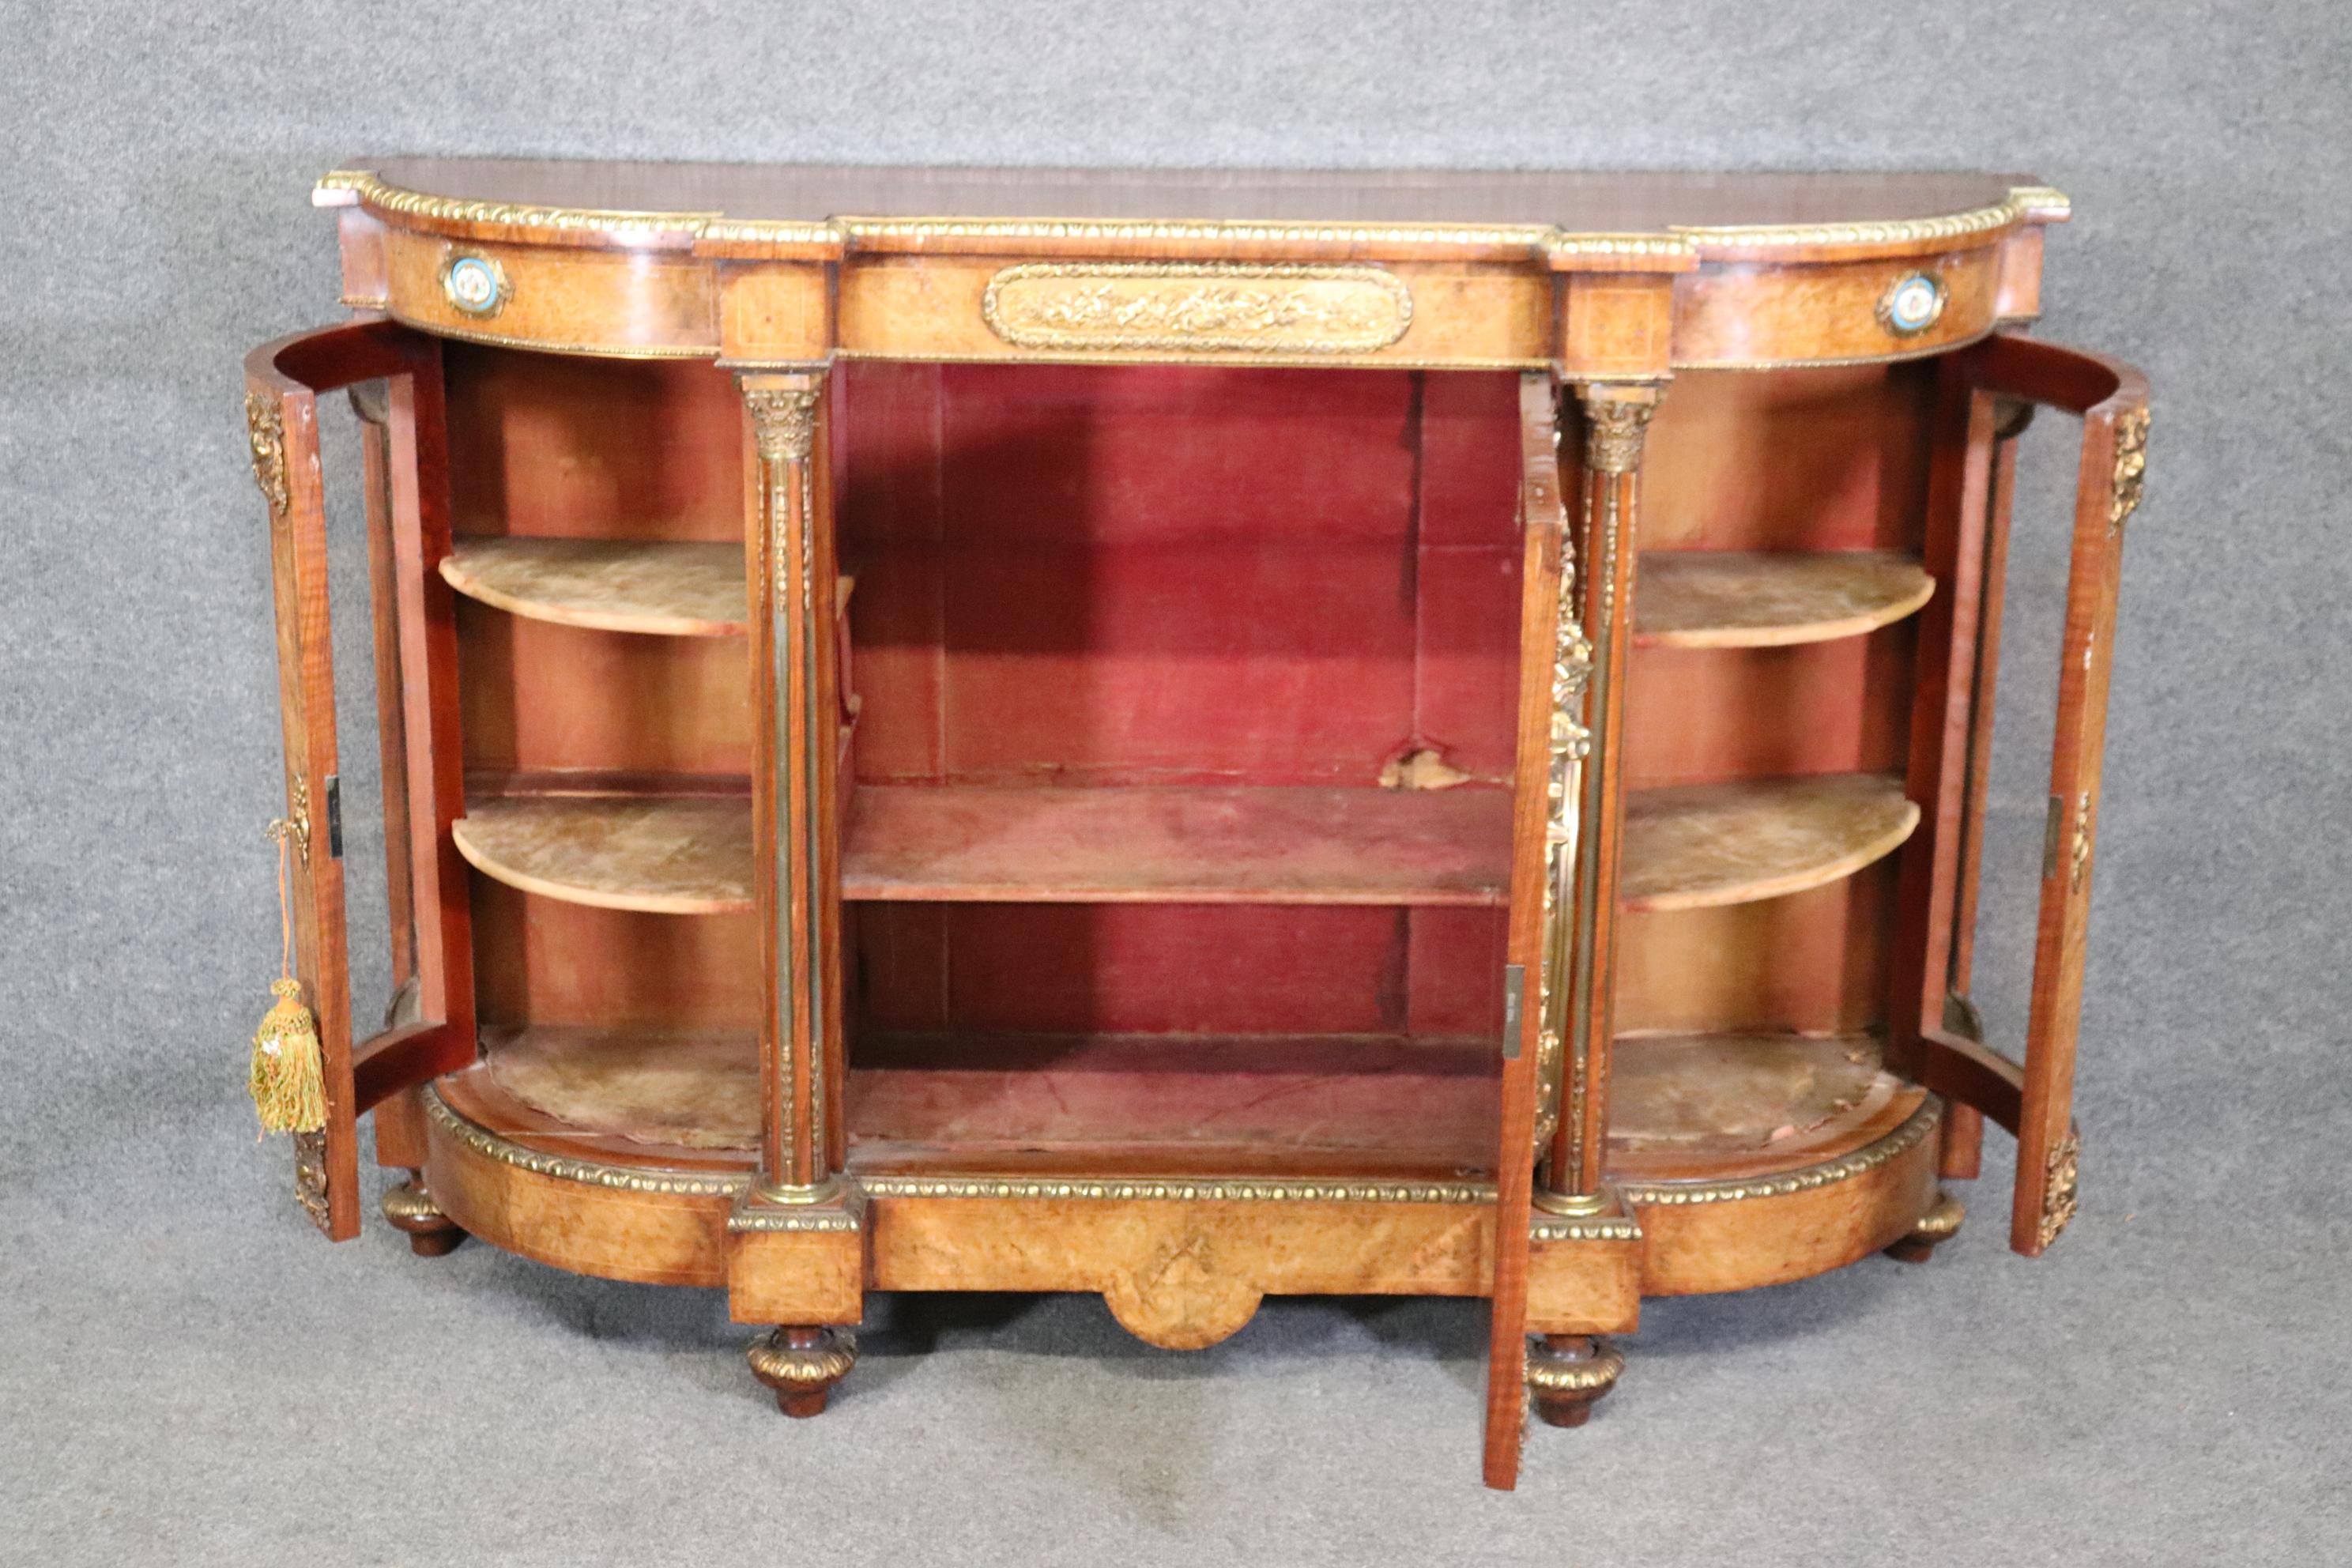 This is a remarkable Druce & Company burled walnut sideboard with some of the finest bronze mounts, porcelain plaques and it's original red velvet interior with bowed glass ends and a glass vitrine door in the center. The sideboard was designed to